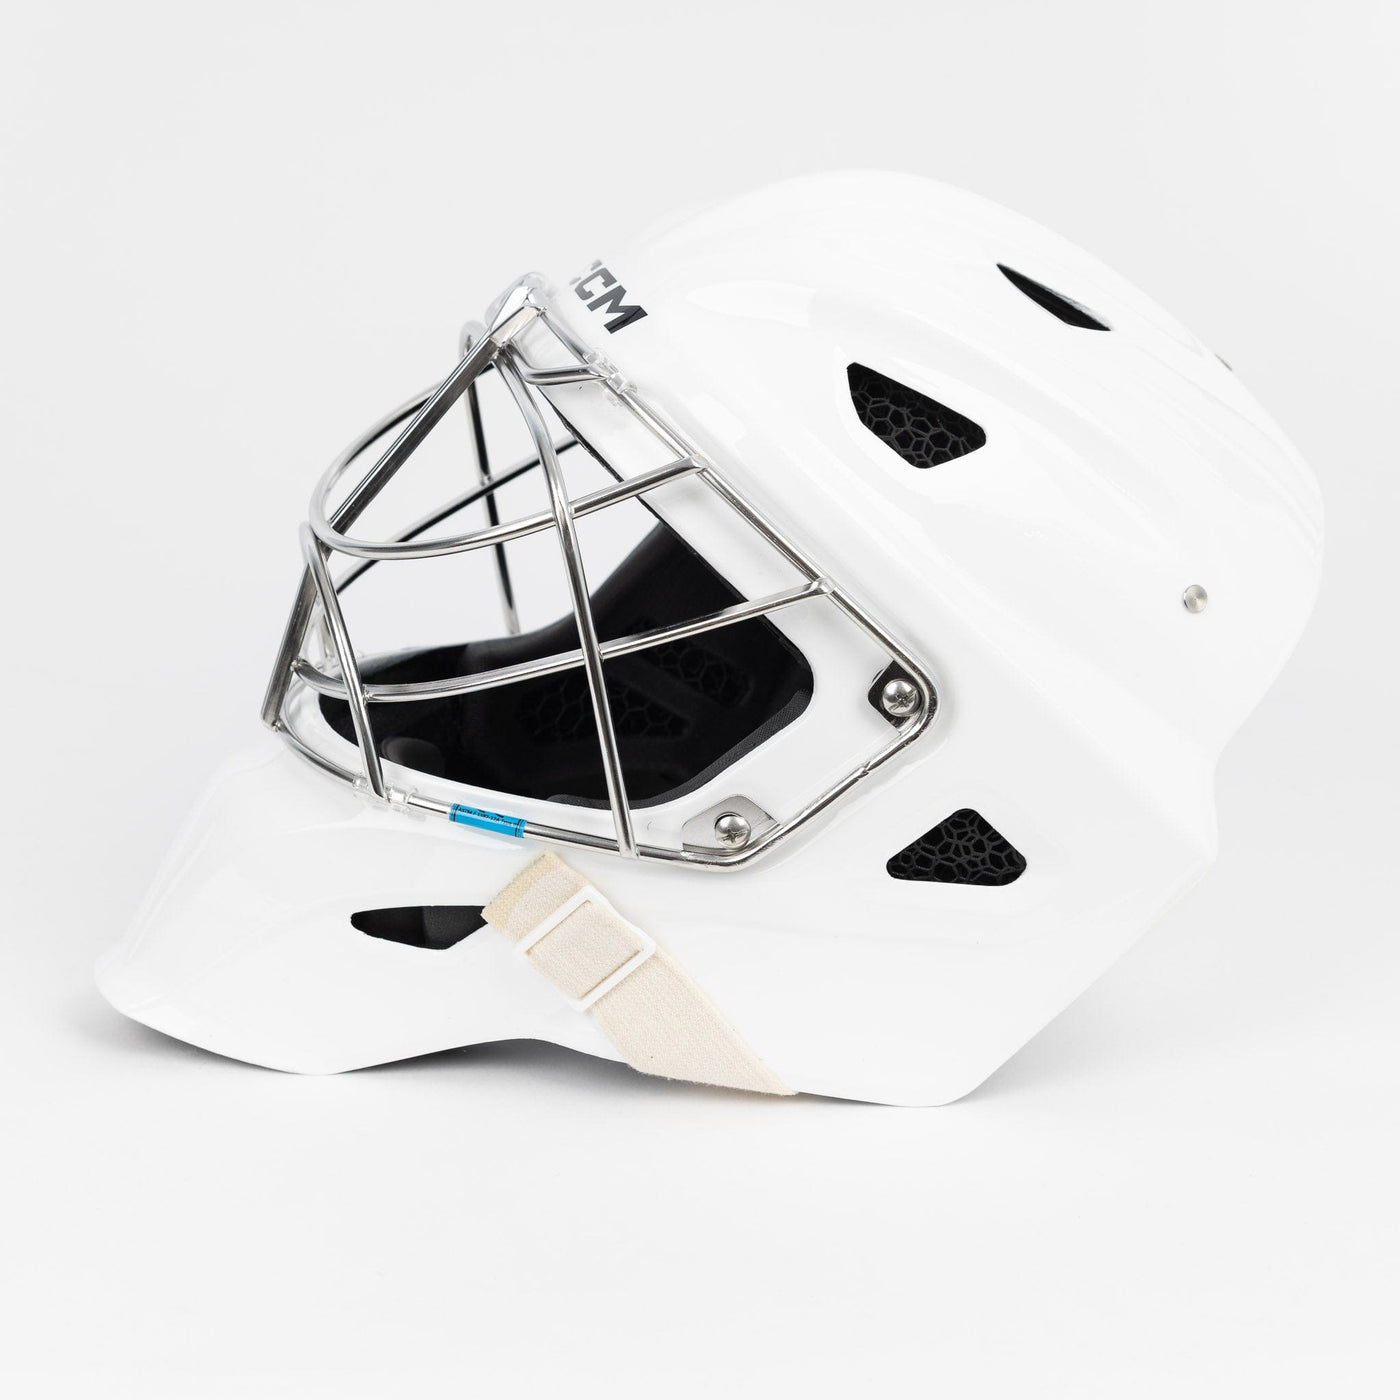 CCM Axis XF Senior Goalie Mask - The Hockey Shop Source For Sports